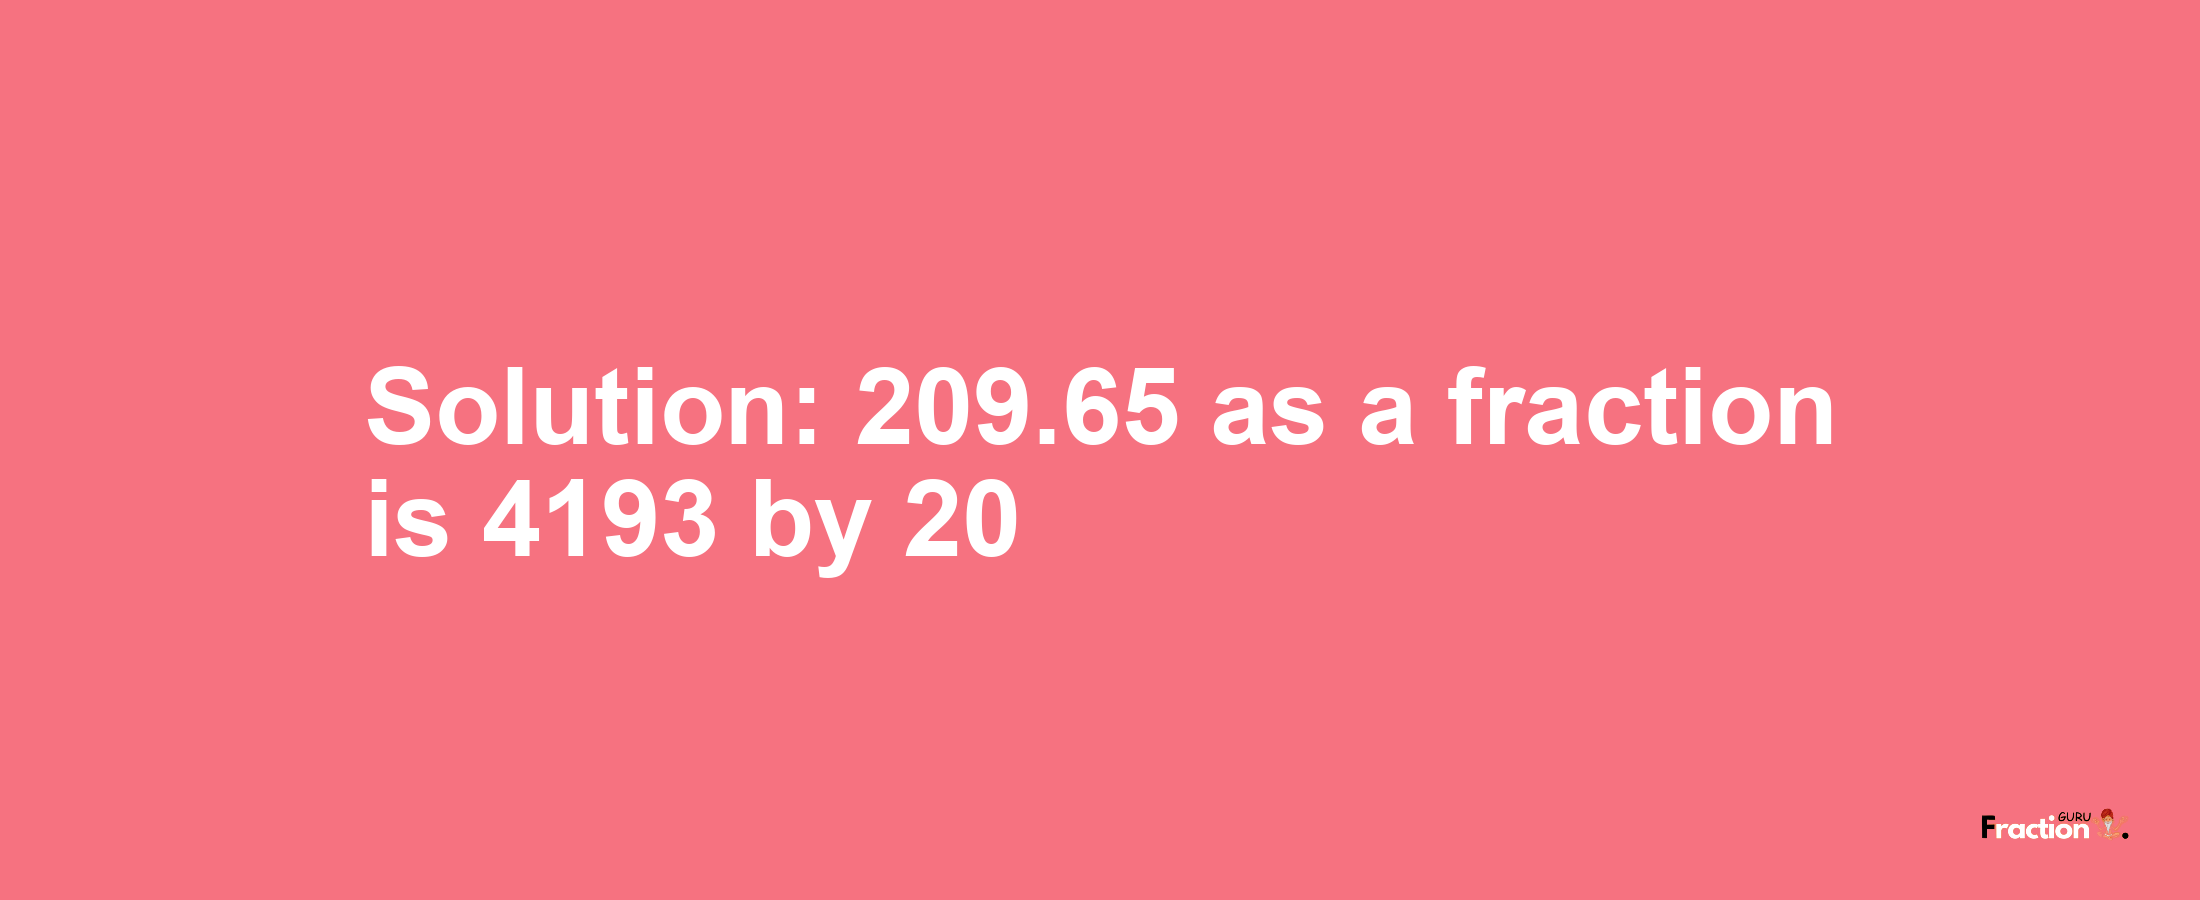 Solution:209.65 as a fraction is 4193/20